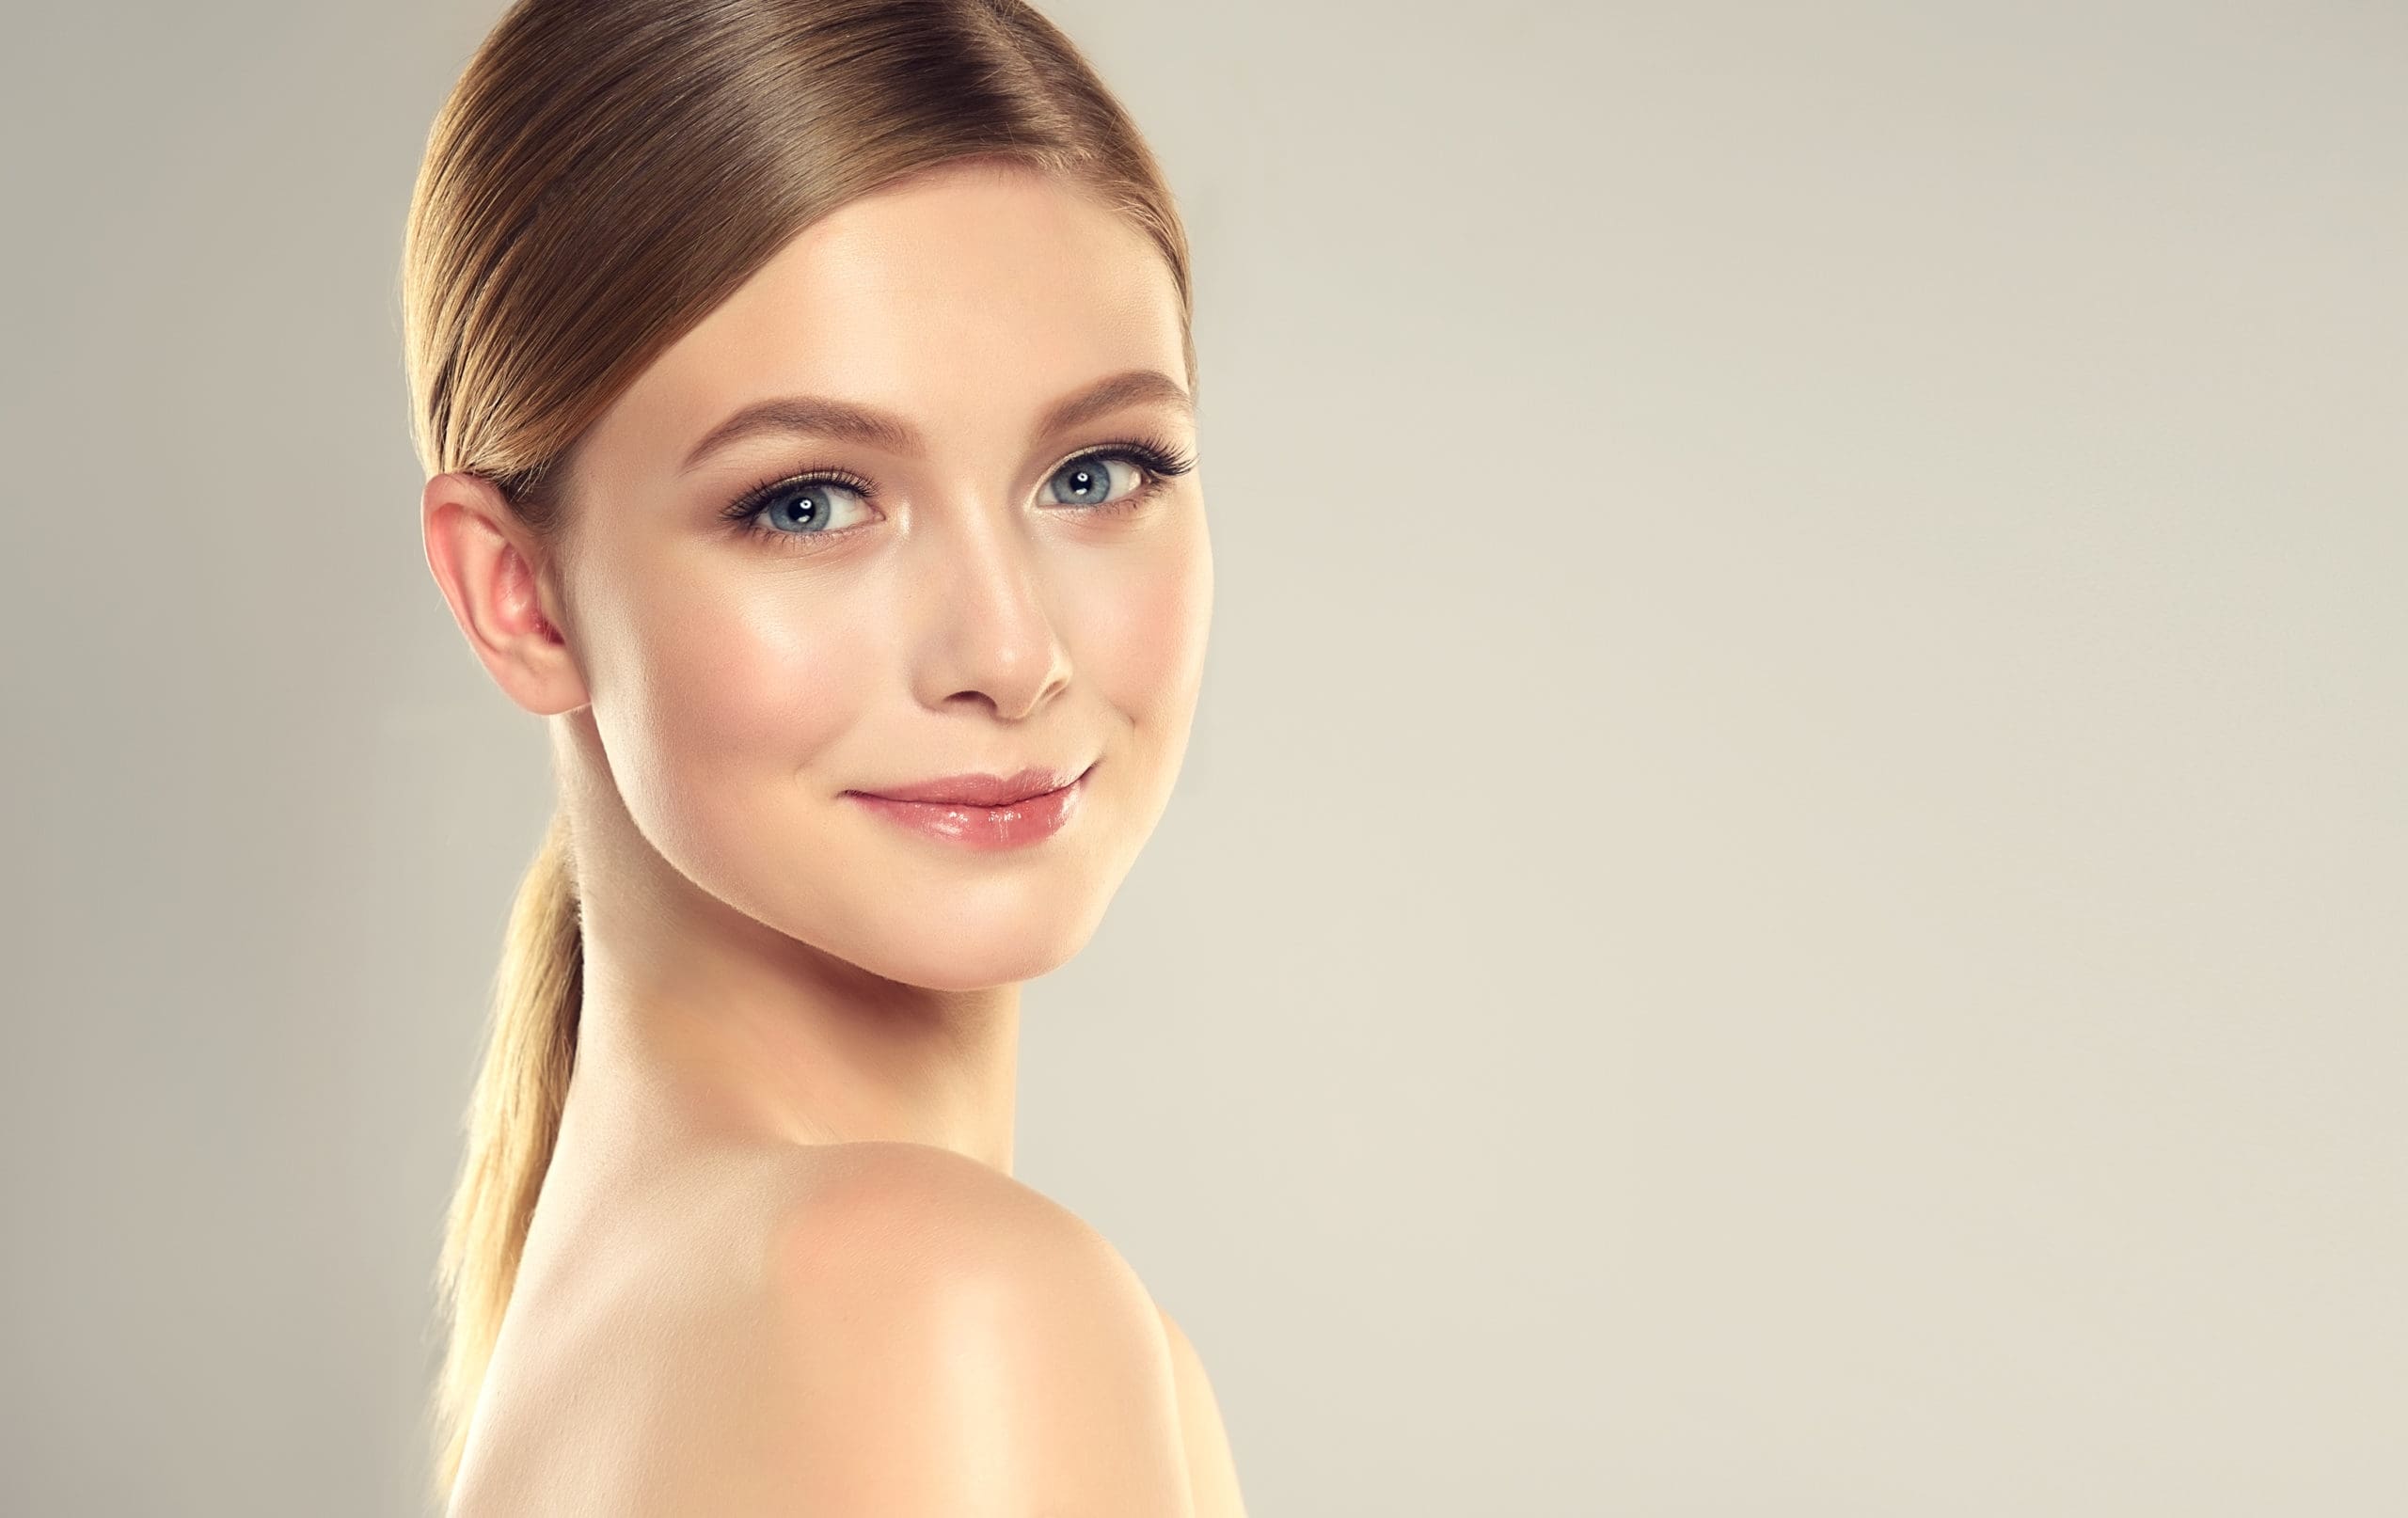 What Are The Best Dermal Fillers in Baltimore